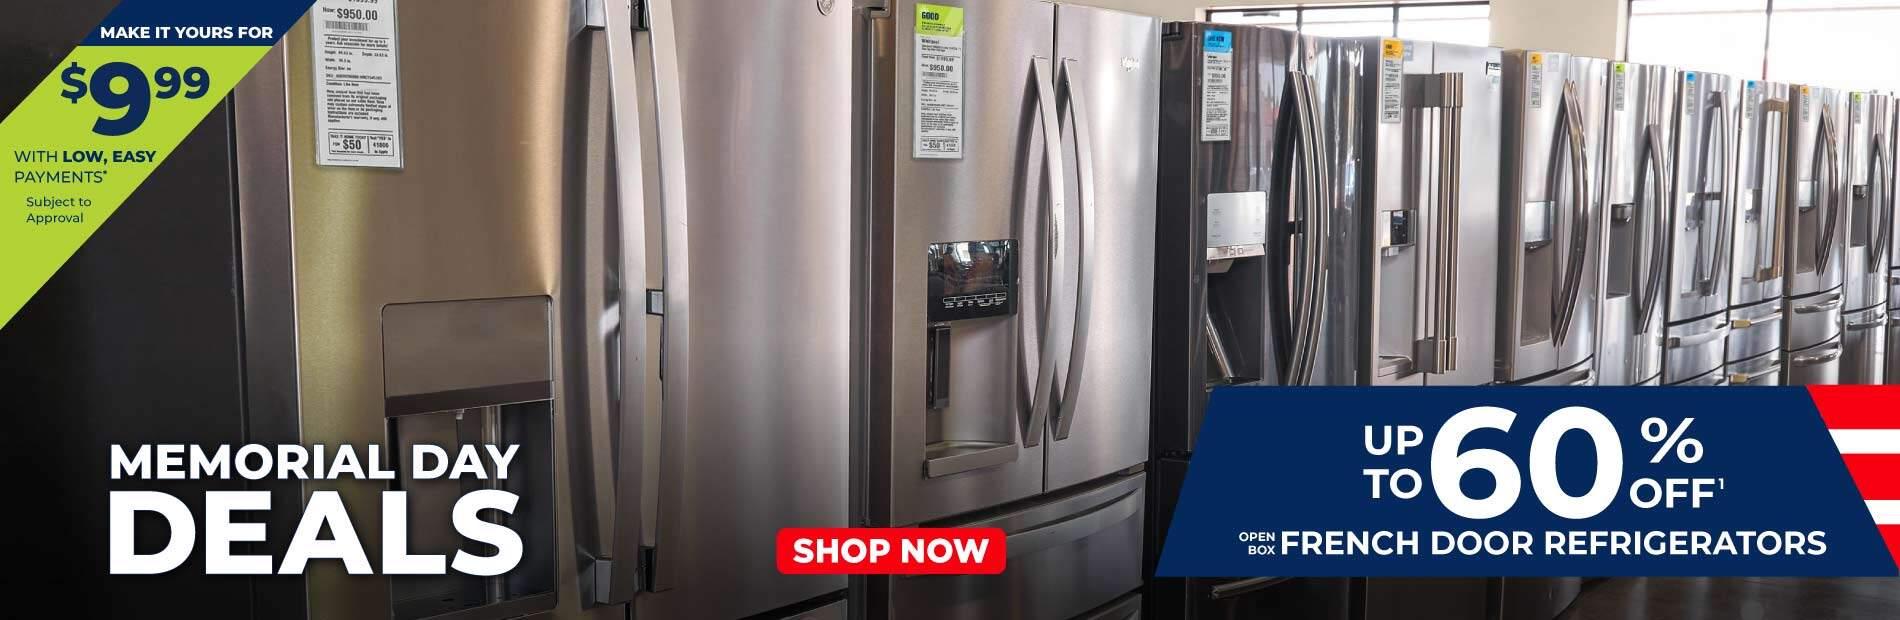 Make it yours for $9.99 with low, easy payments. Subject to approval. Memorial Day Deals. Up to 60% off of open box french door refrigerators.